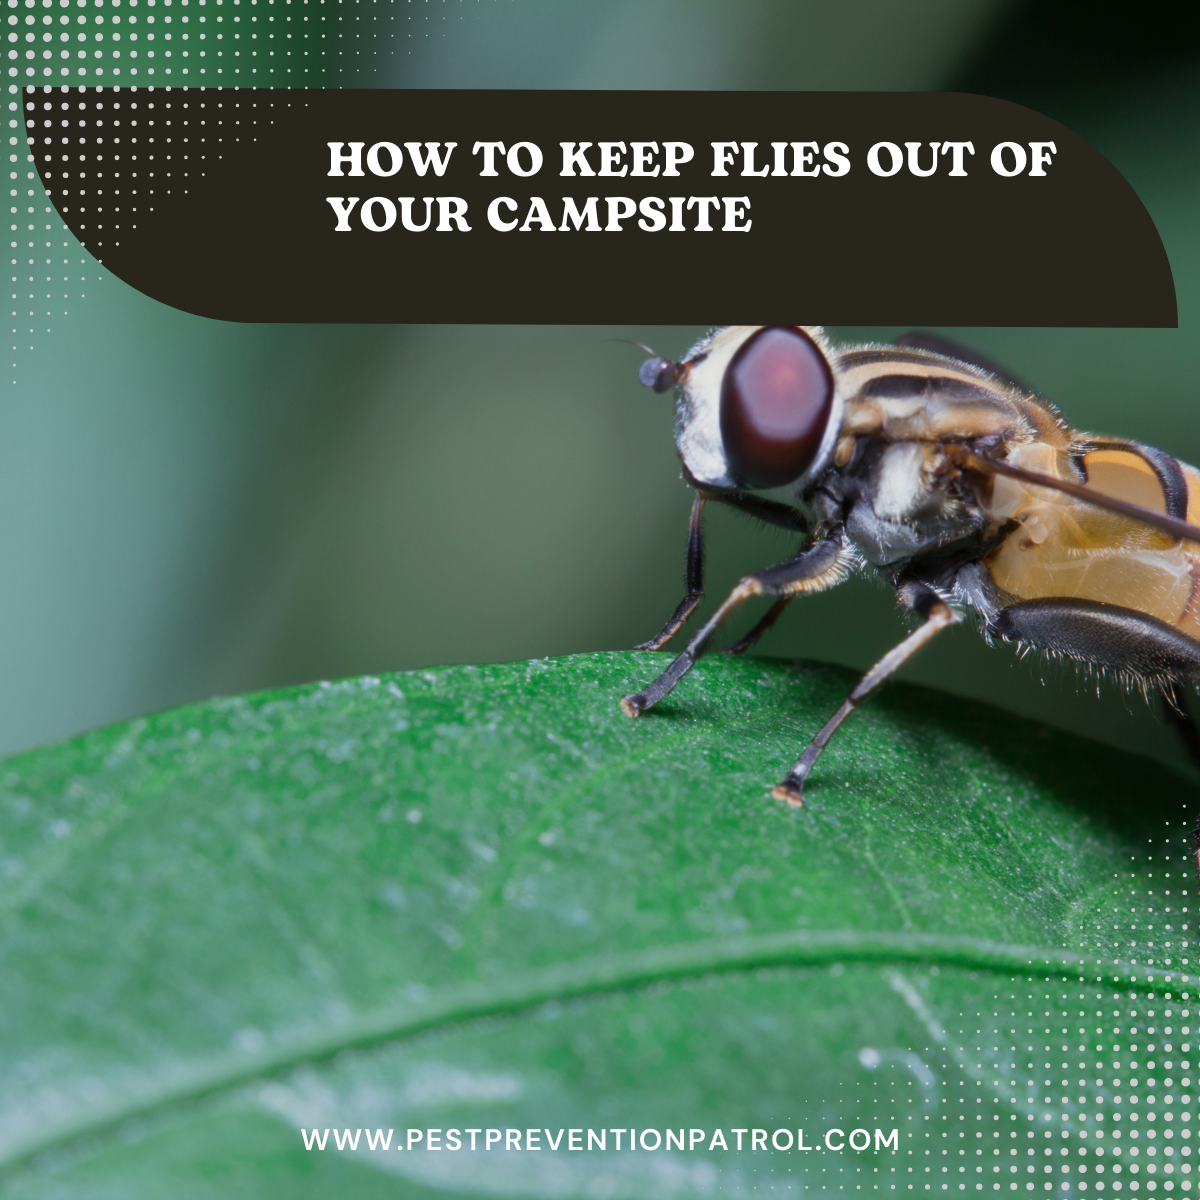 How to Keep Flies Out of Your Campsite